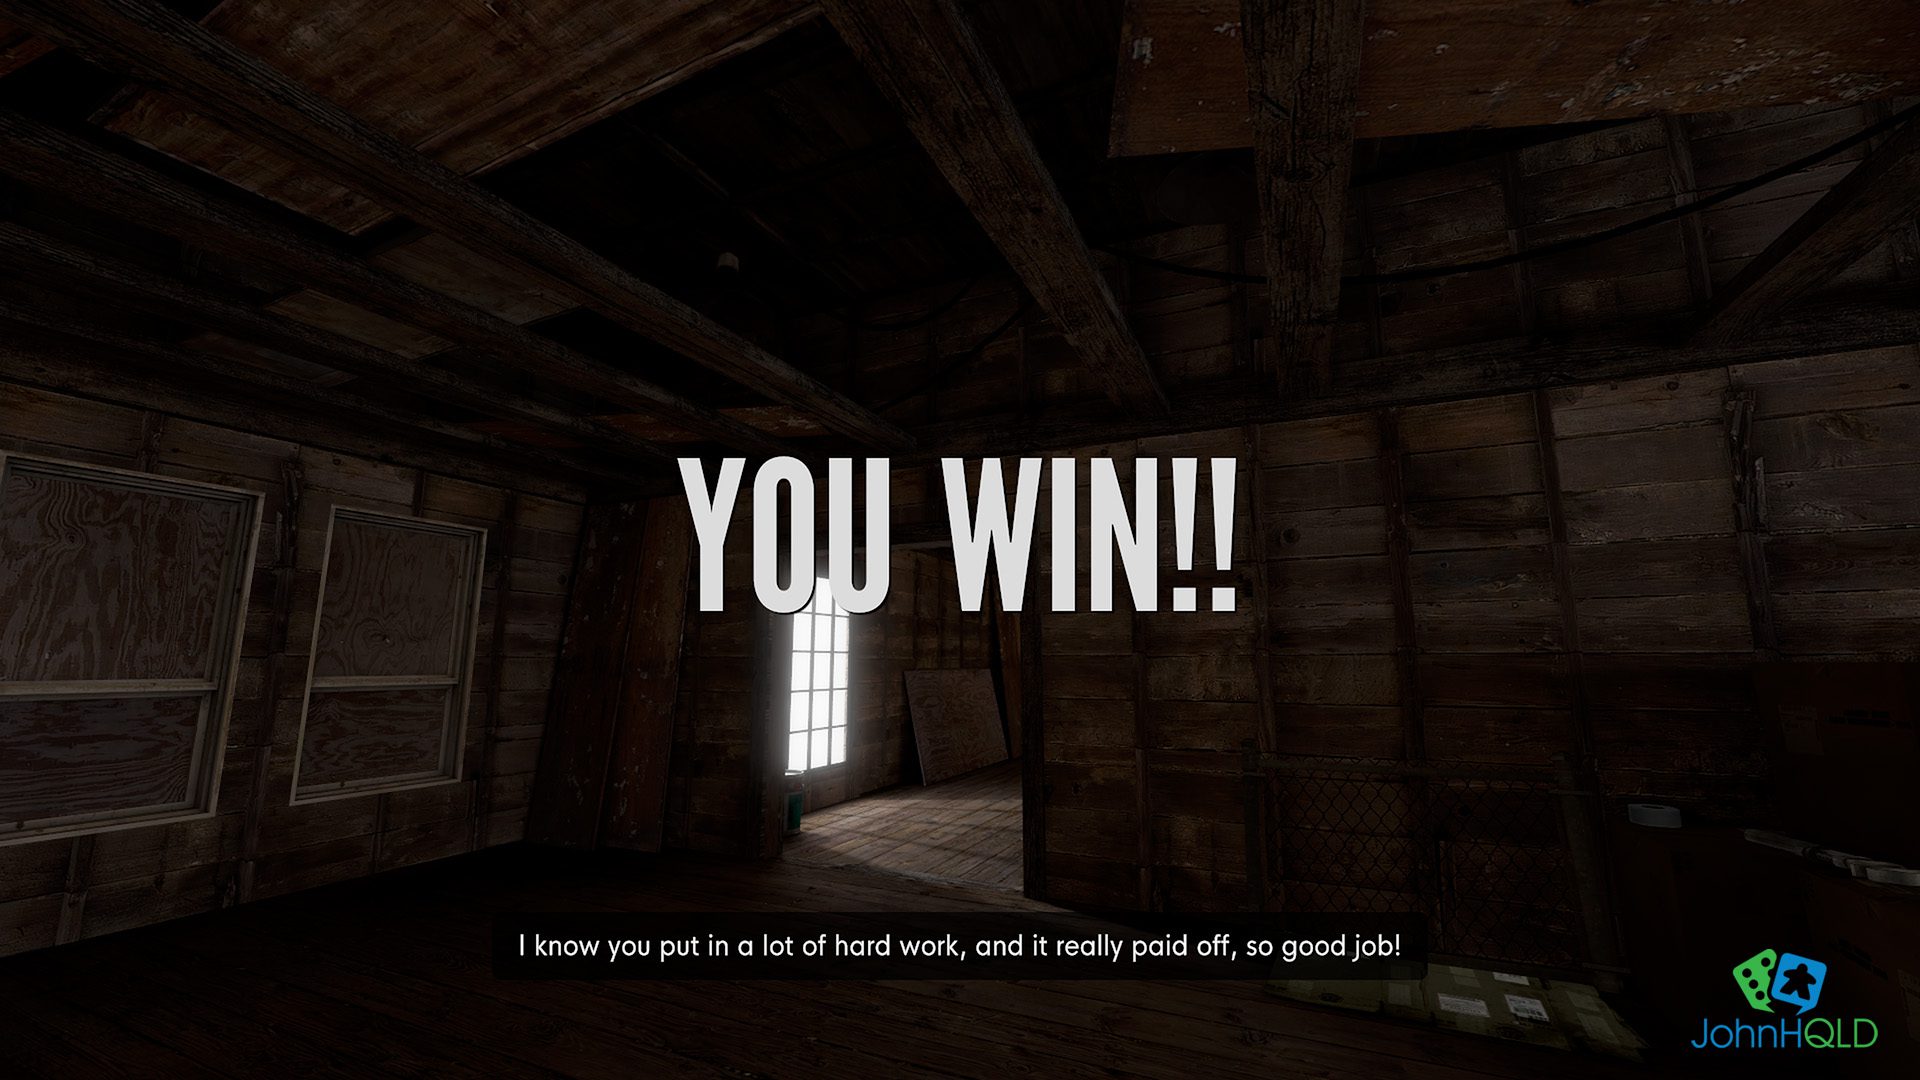 20220613 - Stanley Parable Ultra Deluxe - Yay I won - the story can take you in very unexpected directions